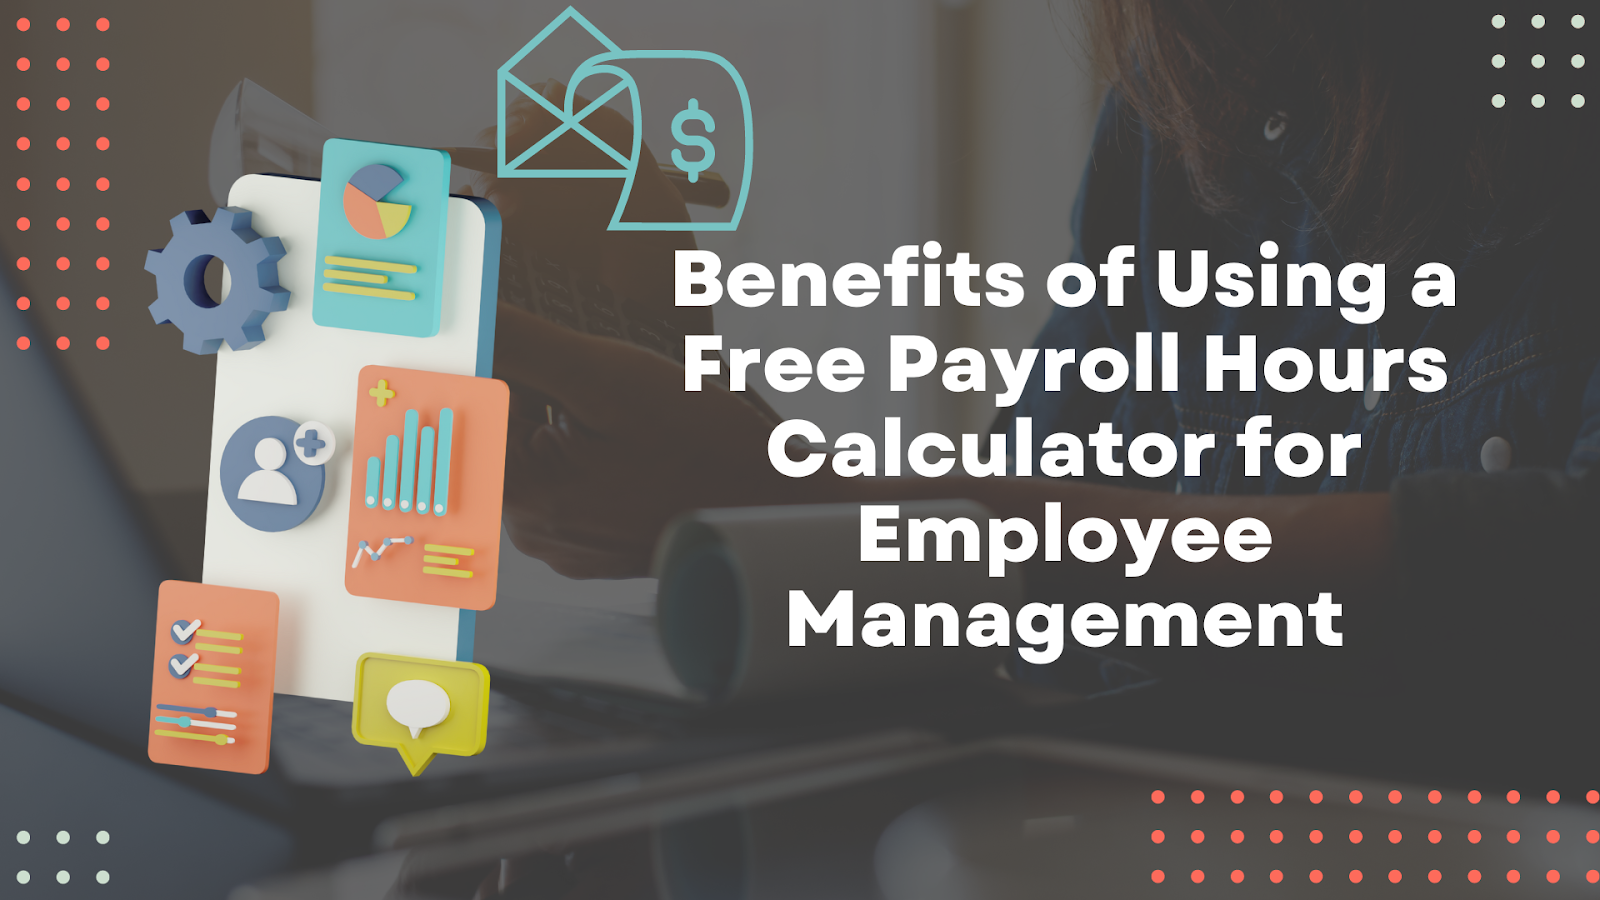 Benefits of Using a Free Payroll Hours Calculator for Employee Management